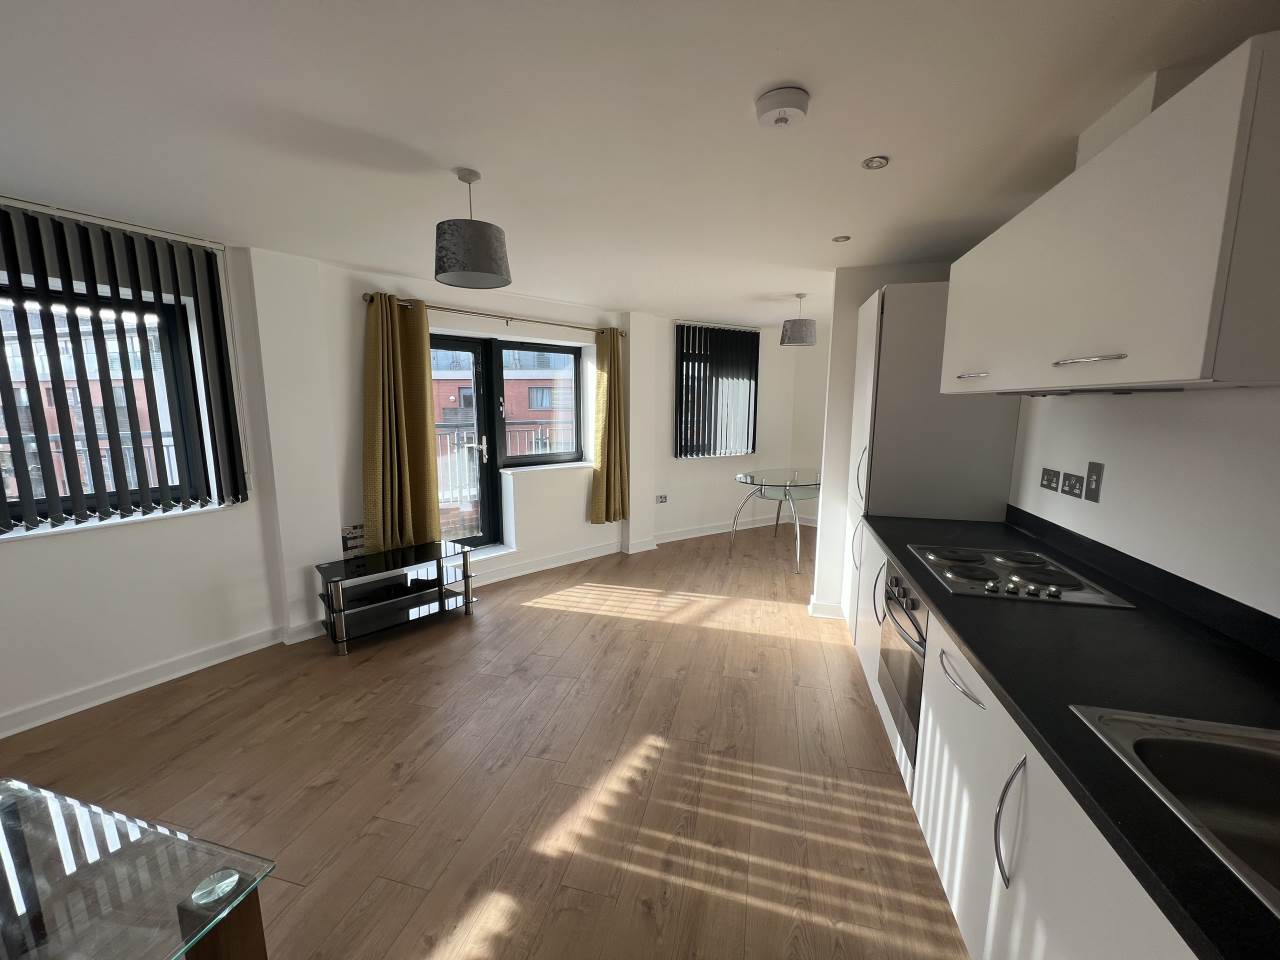 2 bed flat to rent in Granville Street (with one parking space) 2